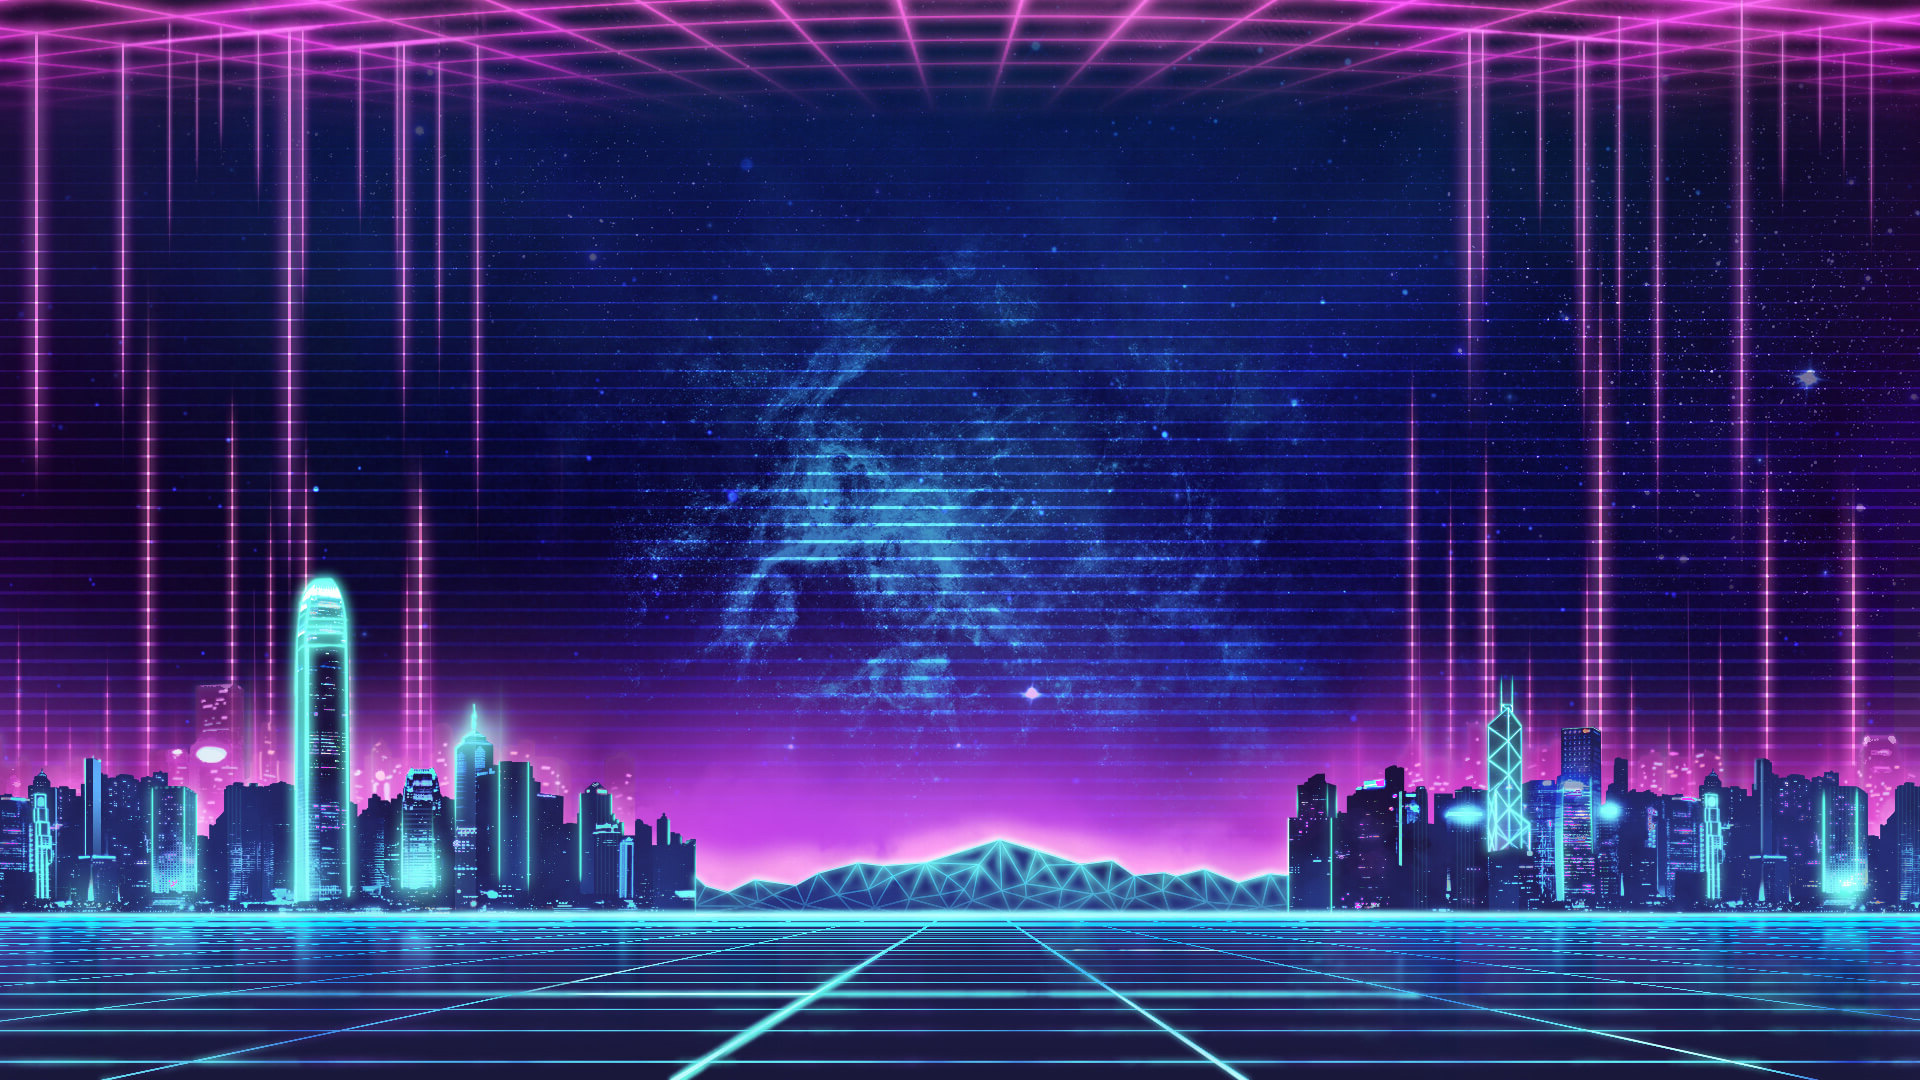 Electro Wave Retro Skyline Buildings, HD Artist, 4k Wallpapers, Images